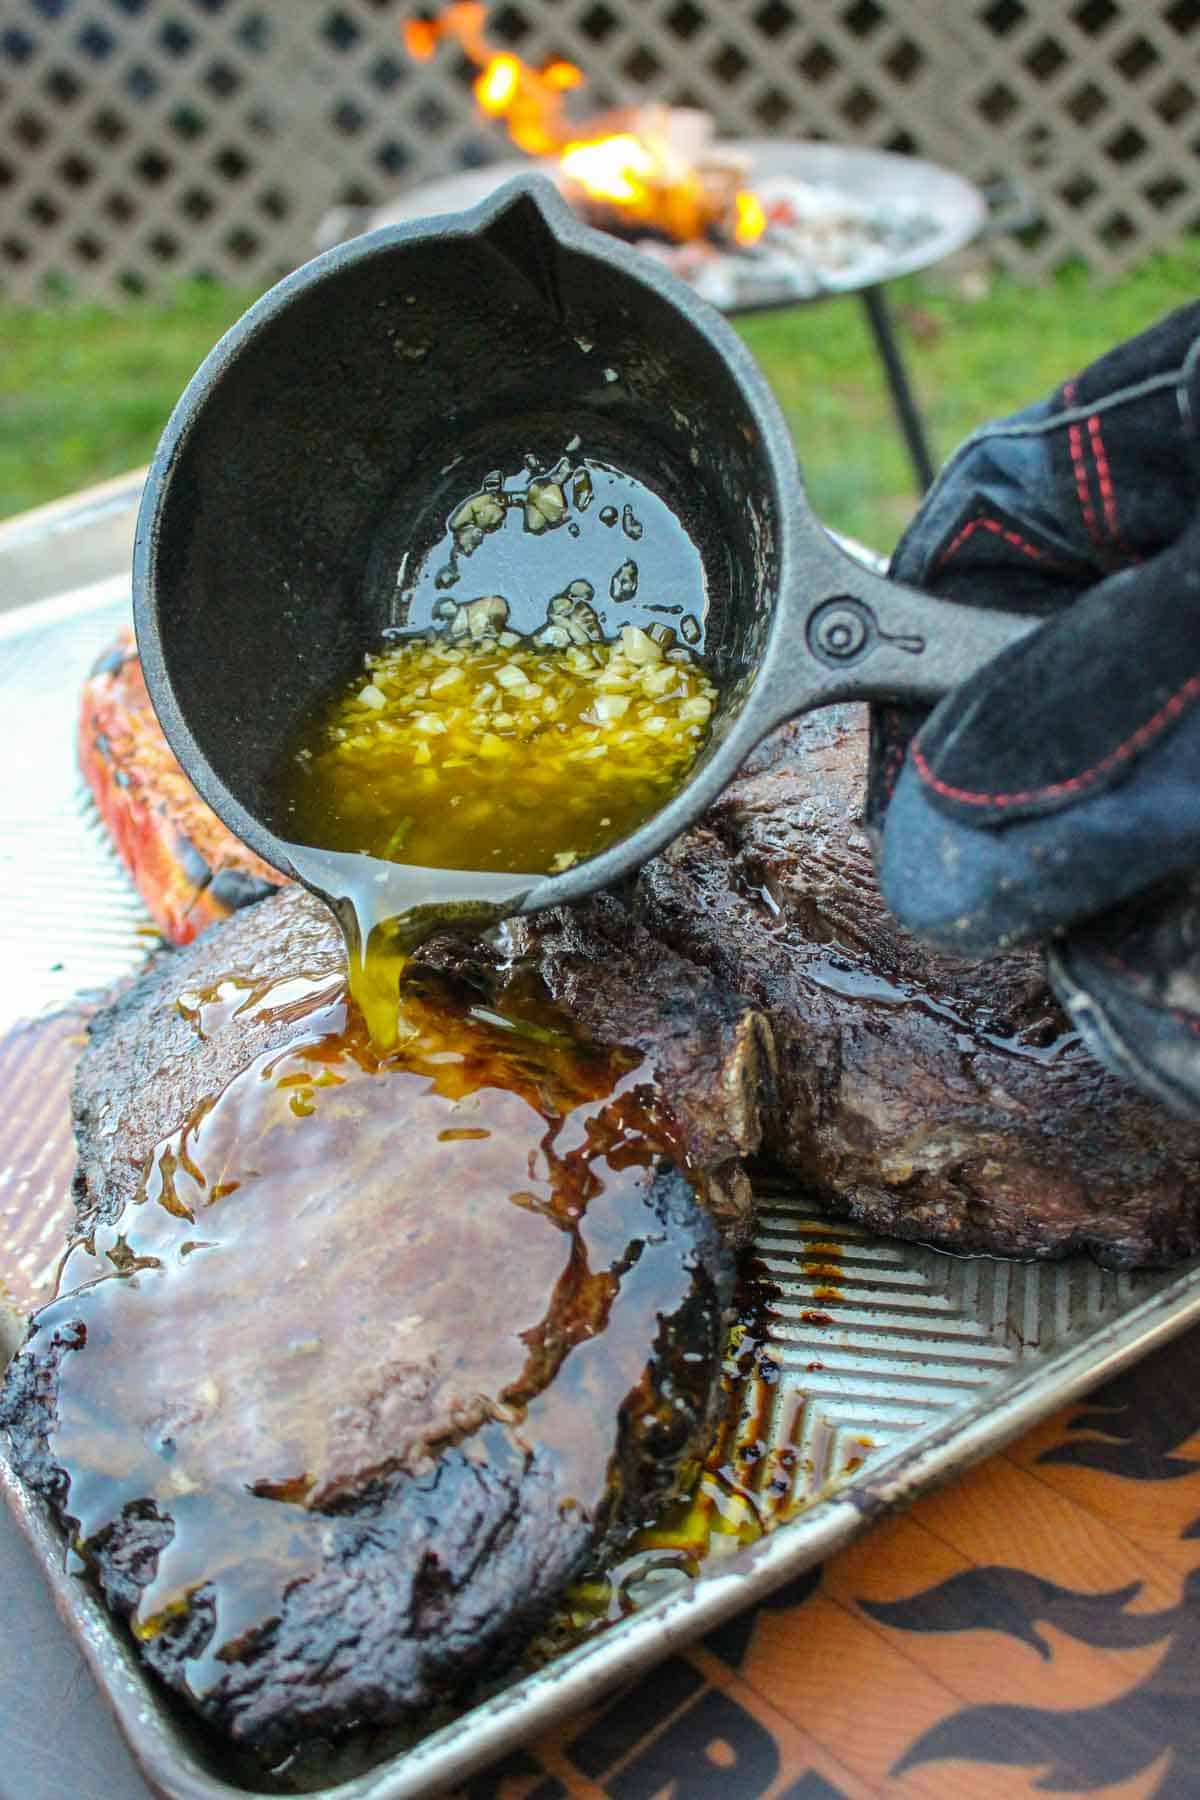 Pouring the butter sauce on top of the tomahawks.